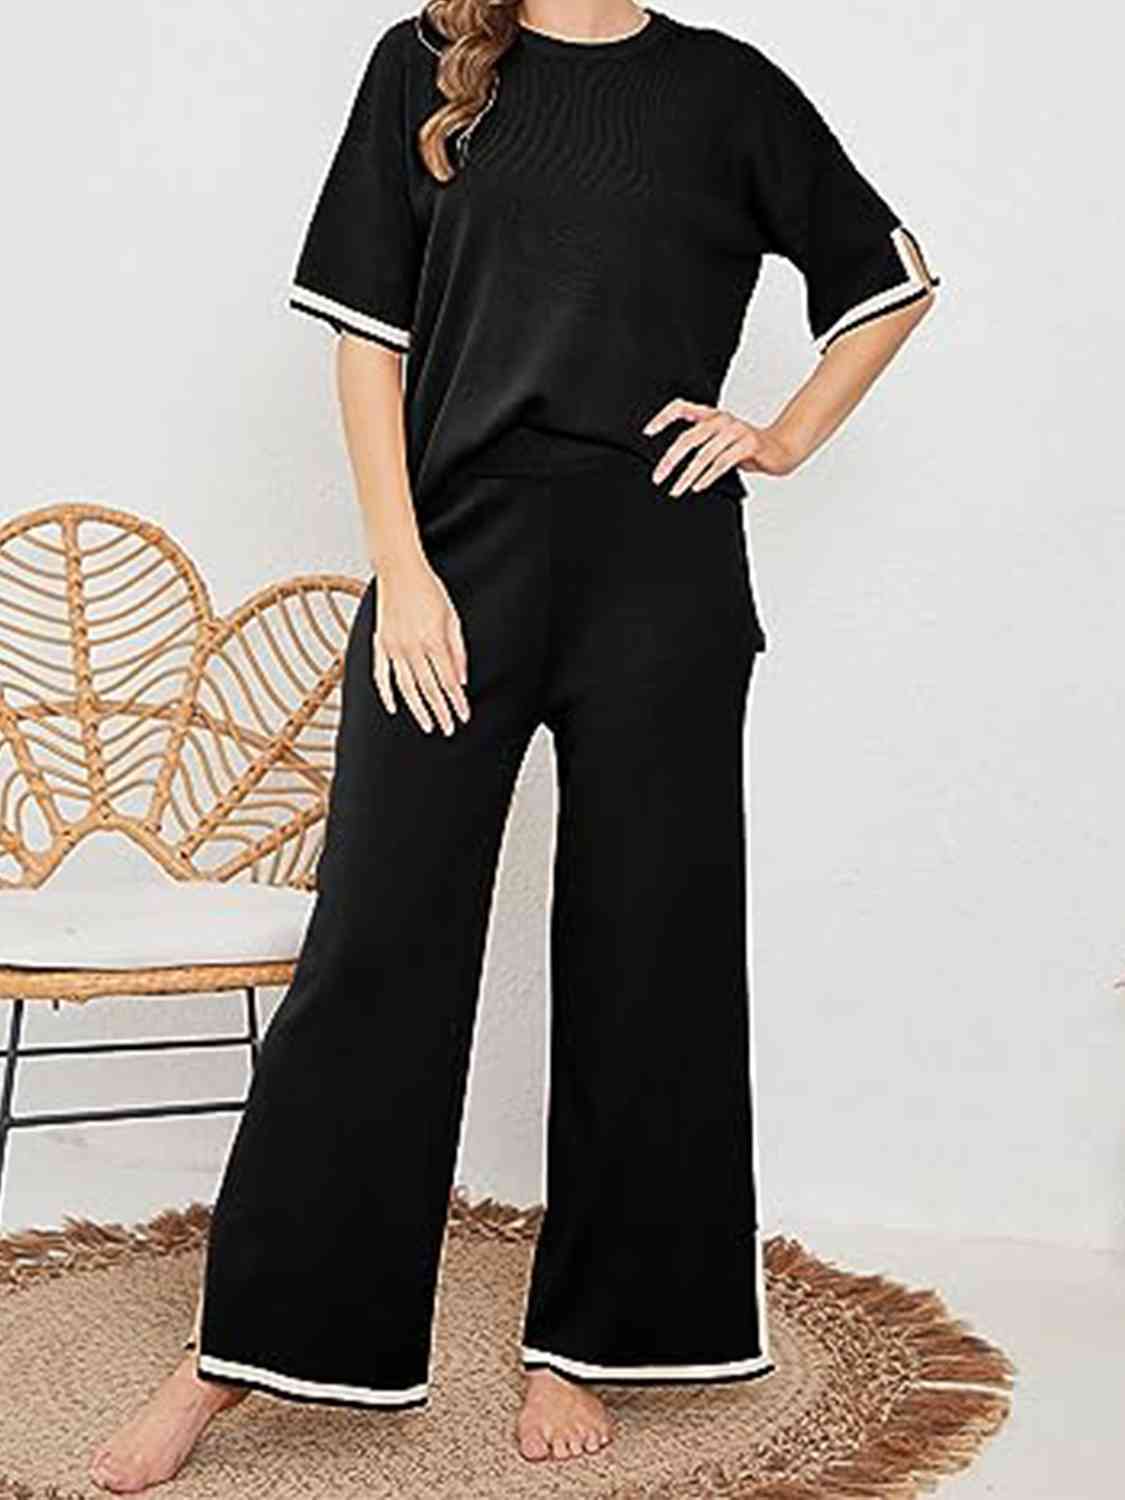 Women's Contrast High-Low Sweater and Knit Pants Set Black